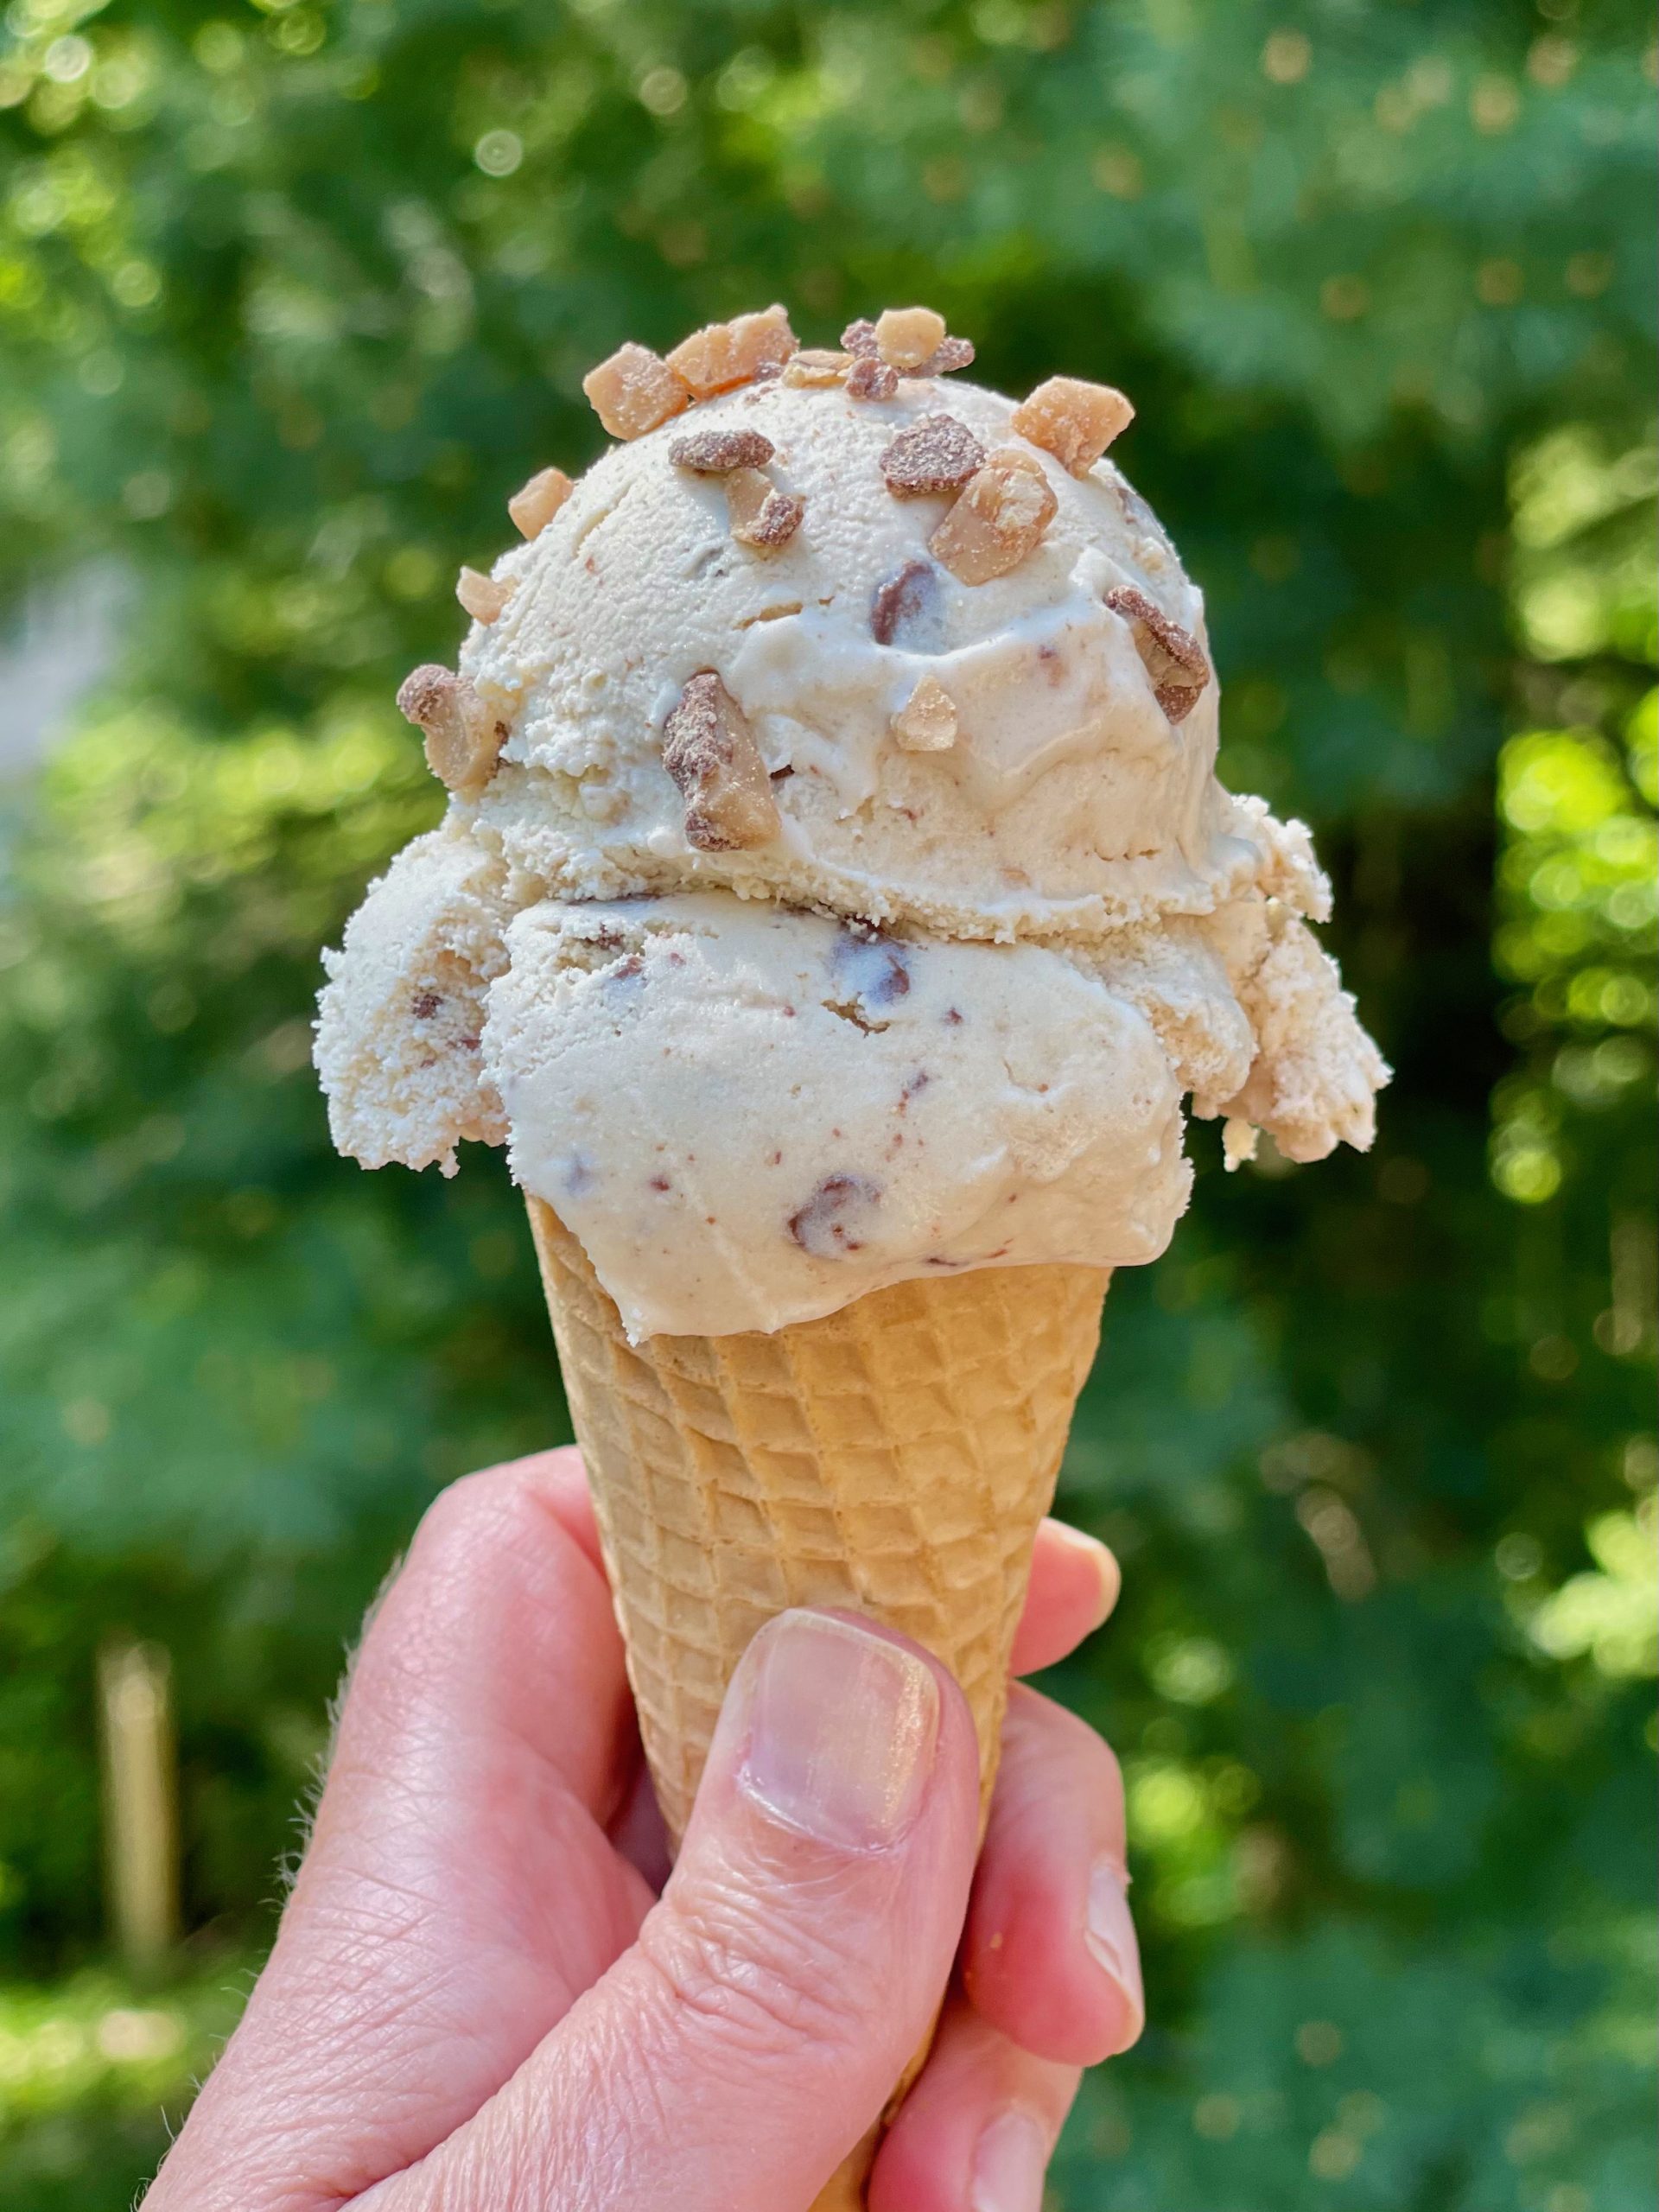 https://www.epicuricloud.com/wp-content/uploads/2021/05/Butter-Toffee-Crunch-Ice-Cream-1-scaled.jpeg